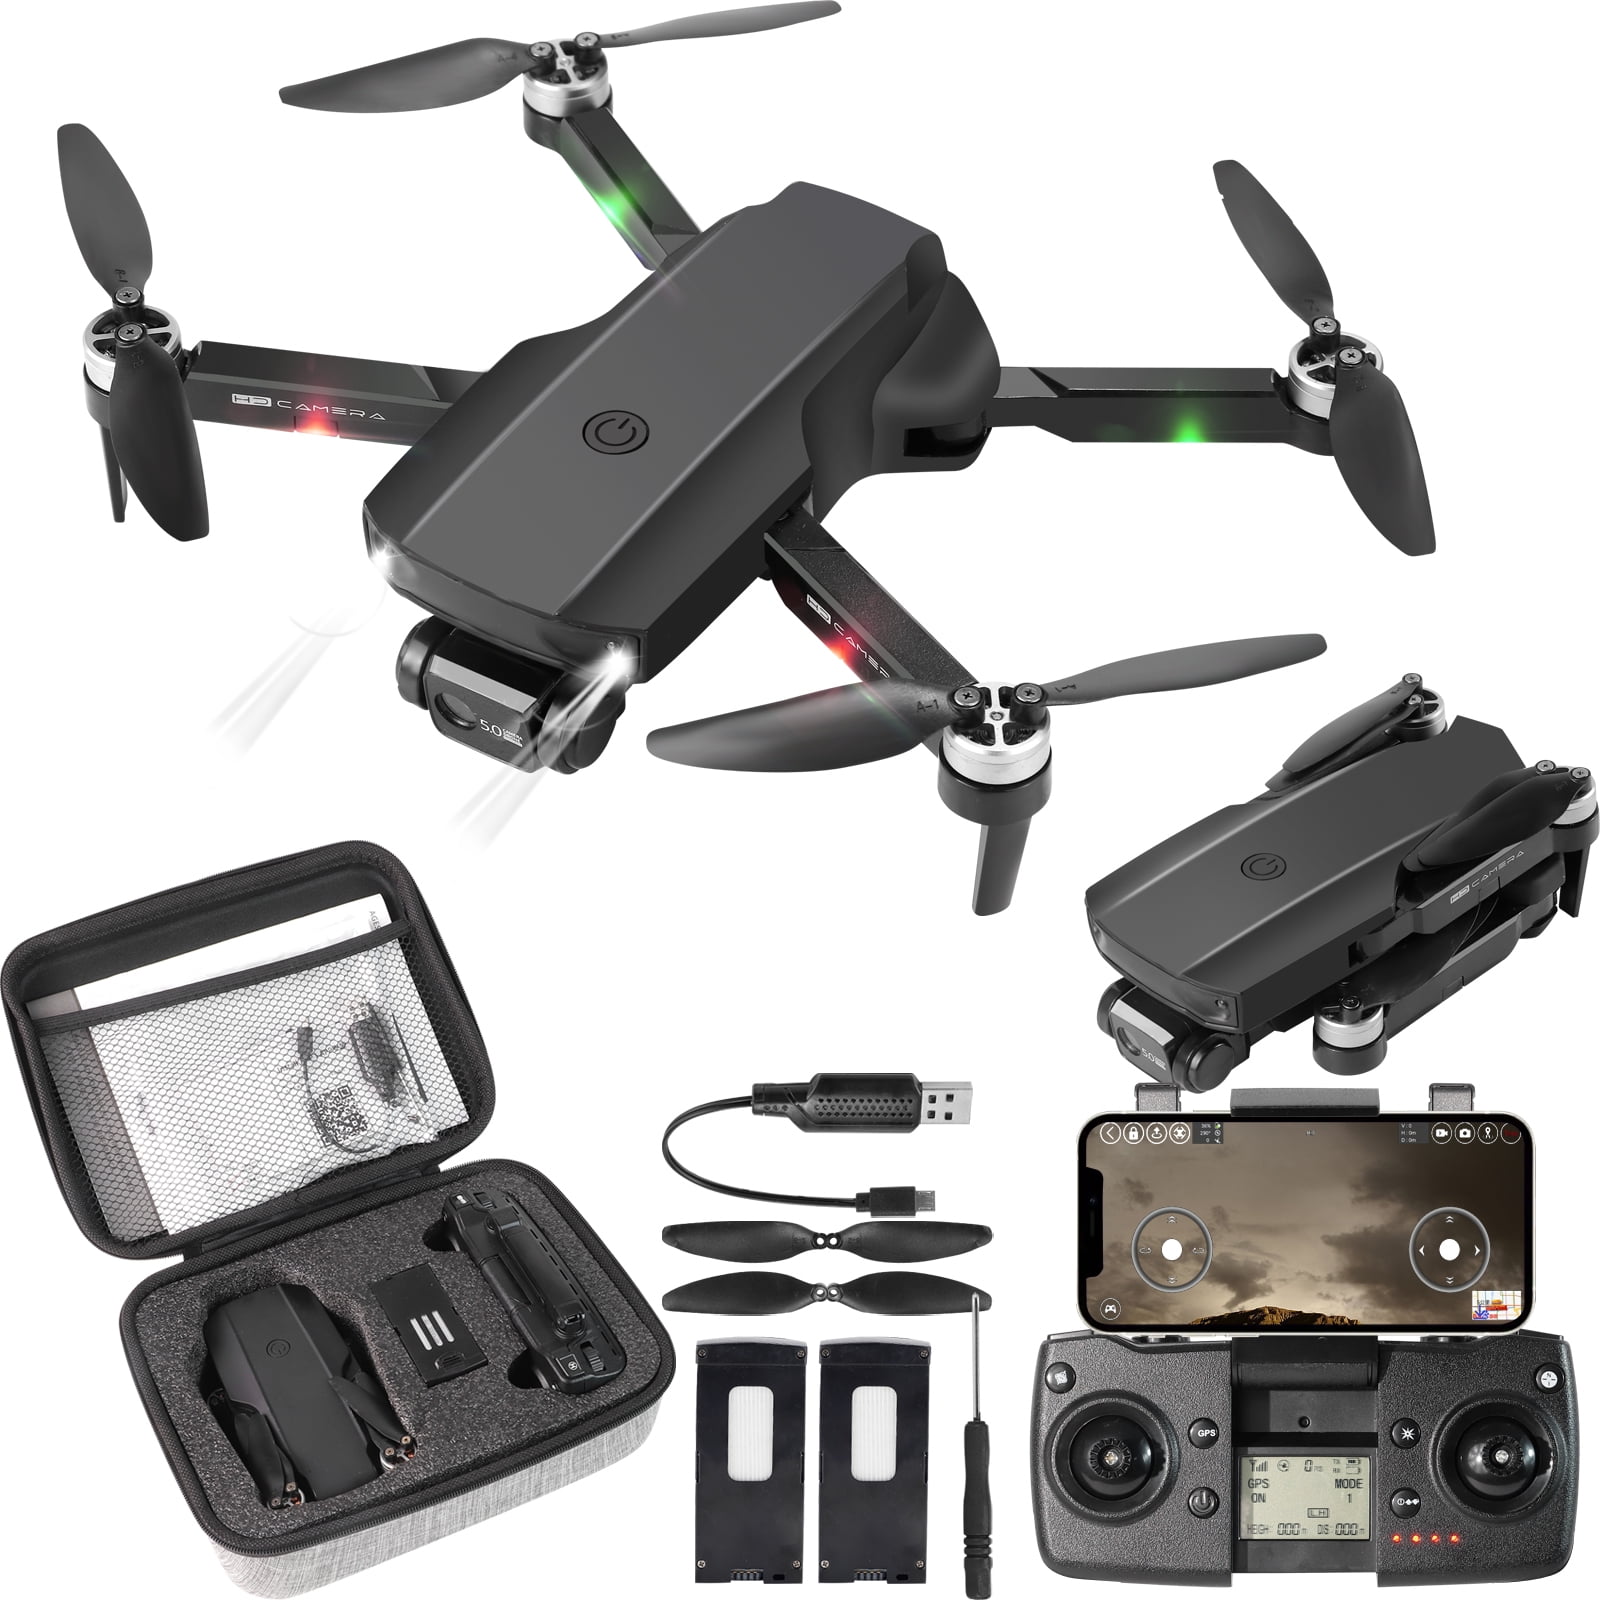 Limited Stock Hyper 3D Advanced Drone (Quadcopter)Kit Price AERIALFREAKS